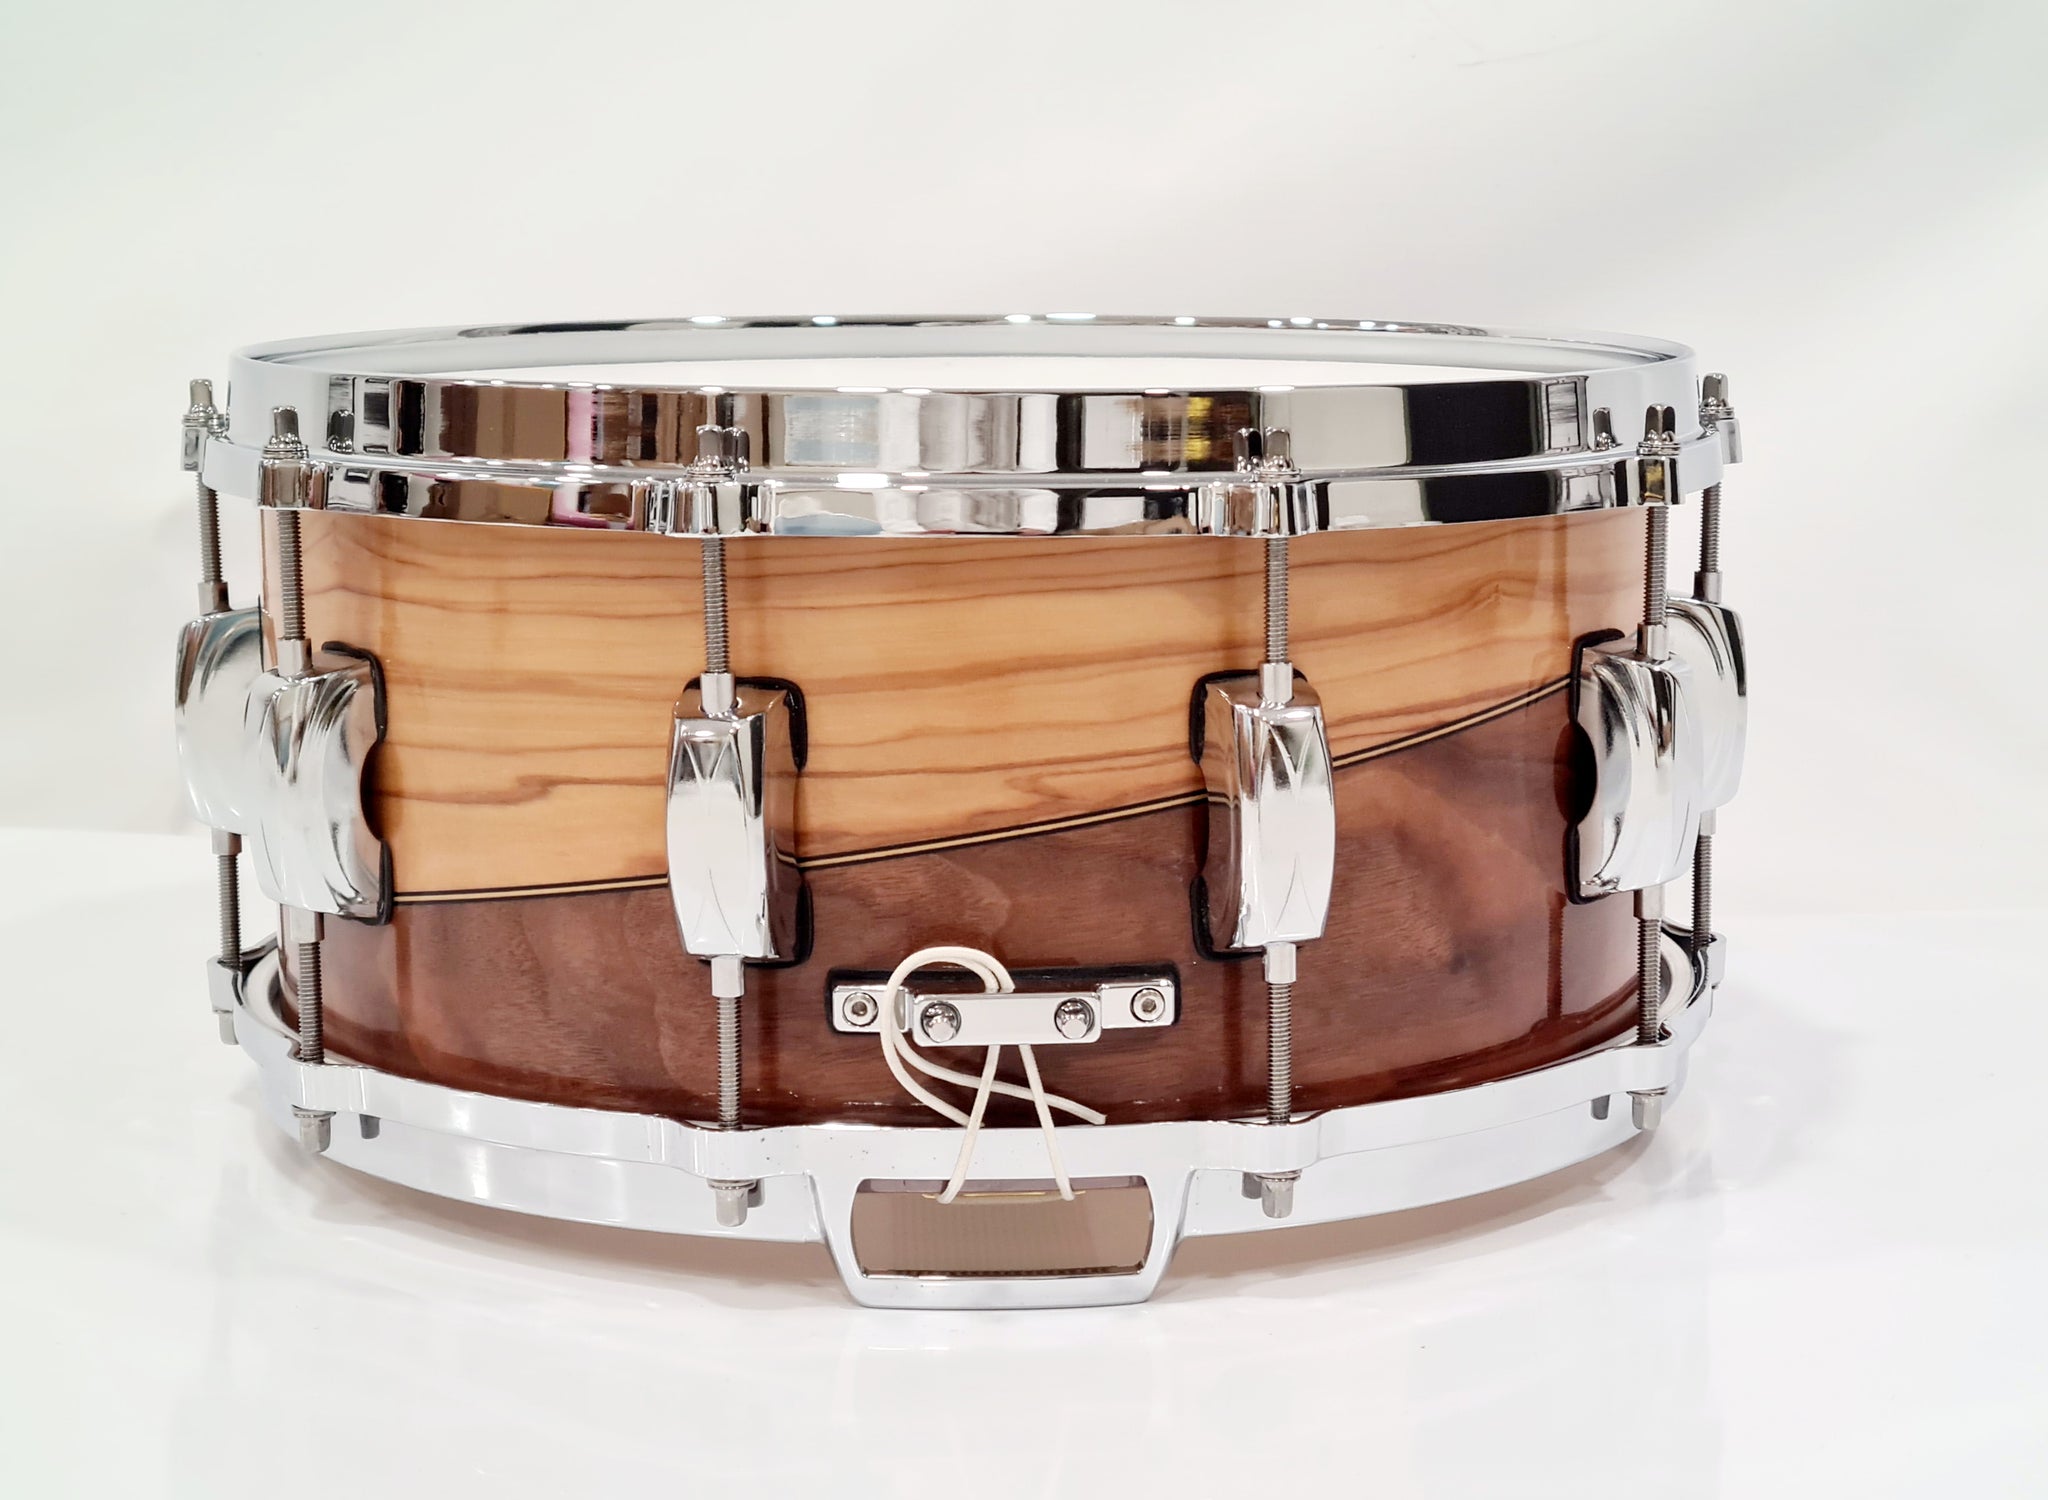 14x6" American walnut & Olive wood snare drum - (made to order)